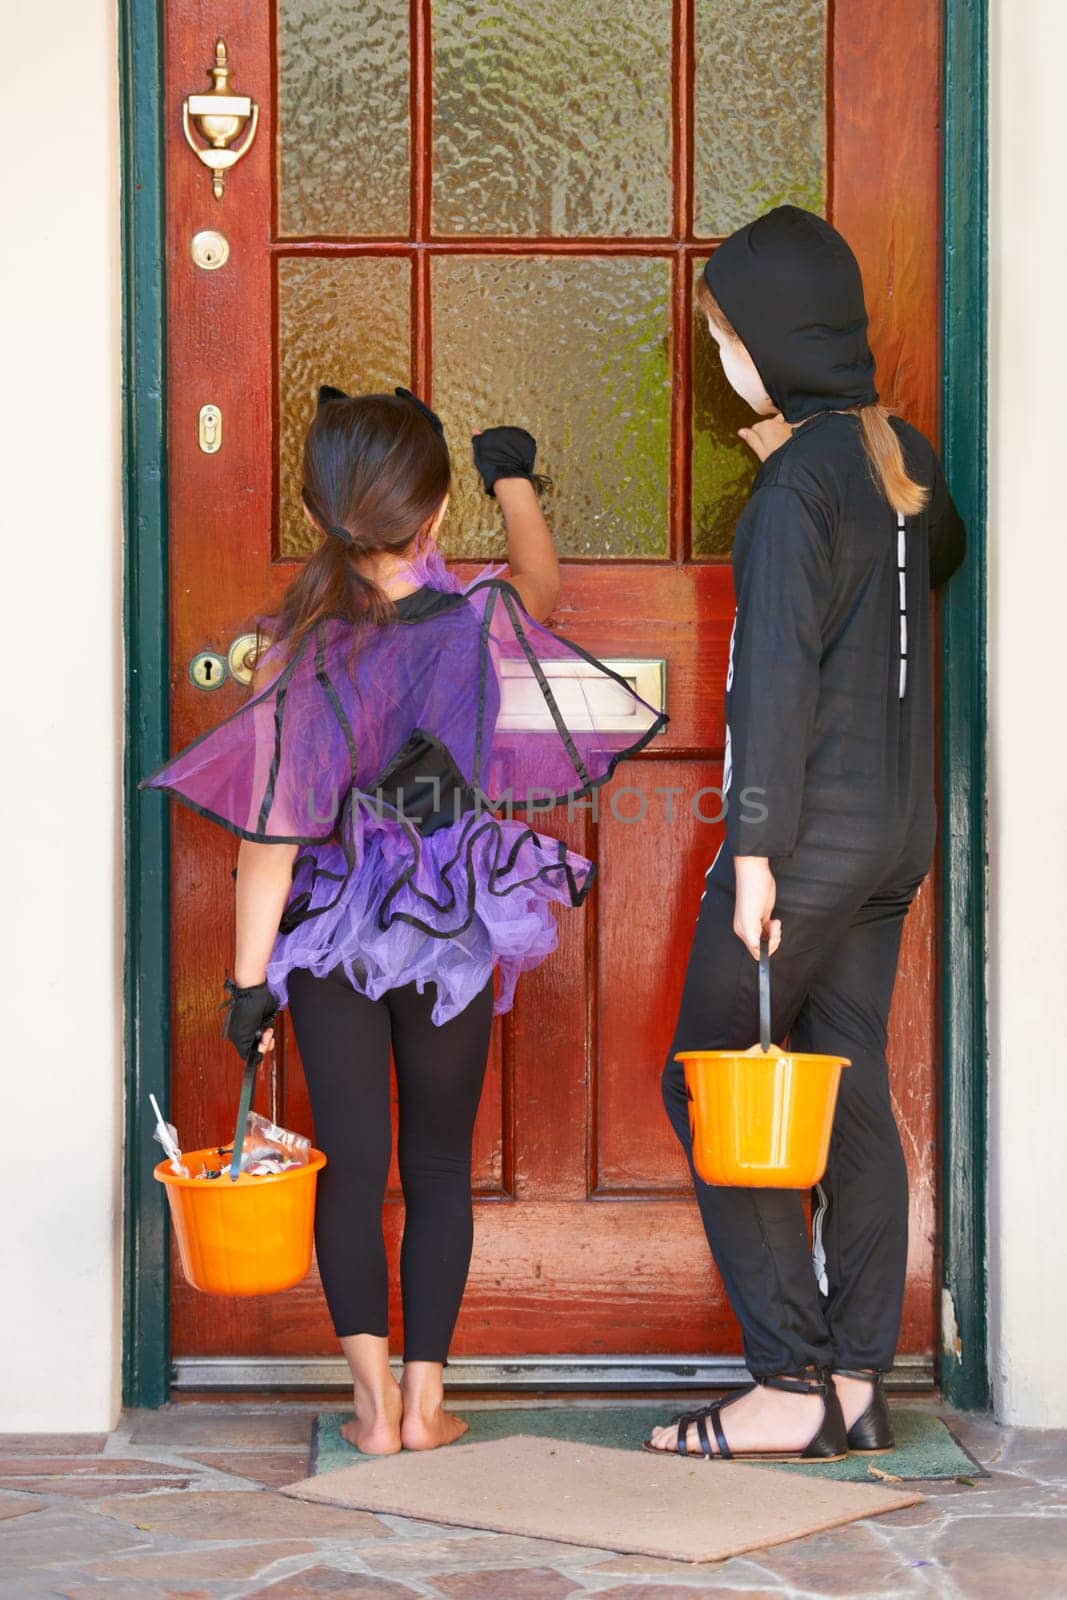 Tick or treating is so much fun. Rearview shot of some children knocking on a door during halloween